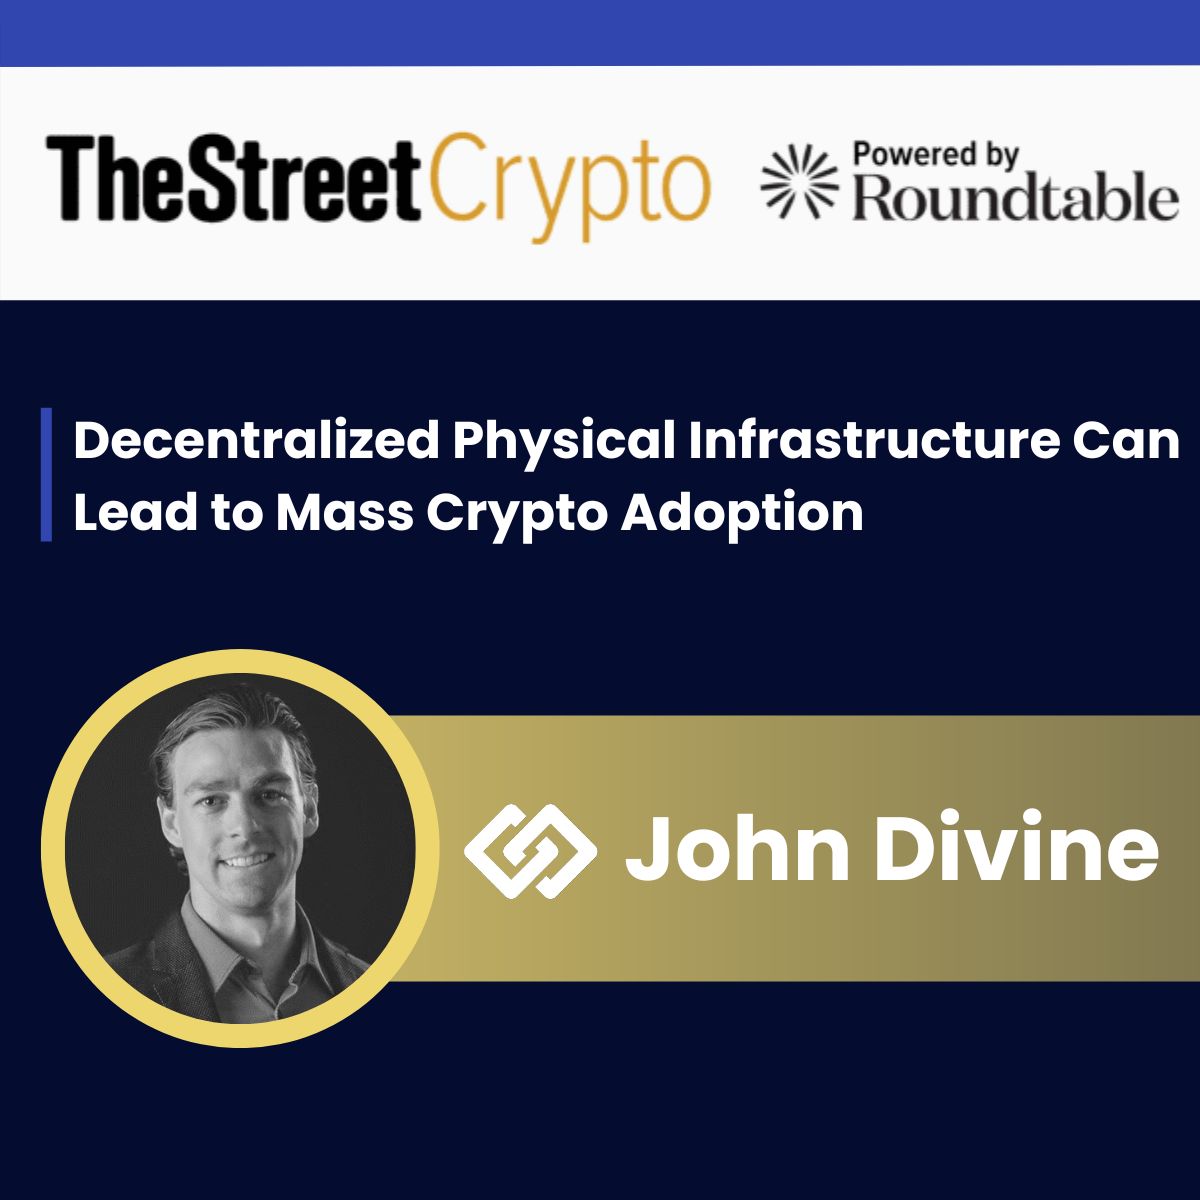 BlockFills' @IamJohnDivine on @TheStreet: Decentralized Physical Infrastructure Can Lead to Mass Crypto Adoption: bit.ly/3WPpaFs